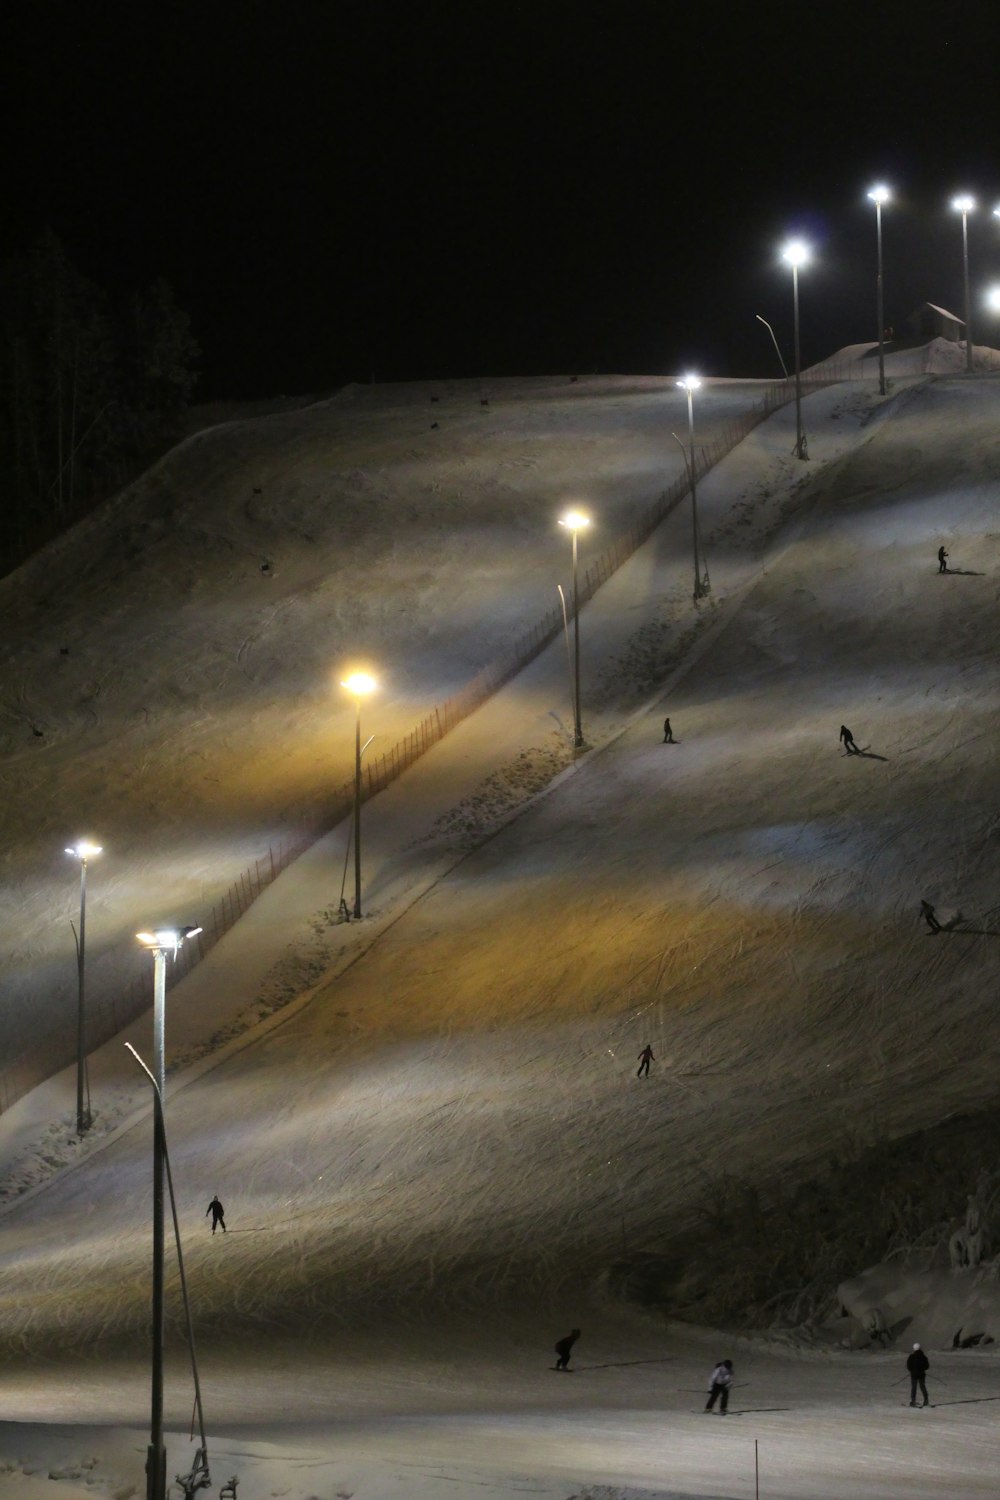 a group of people skiing down a snow covered slope